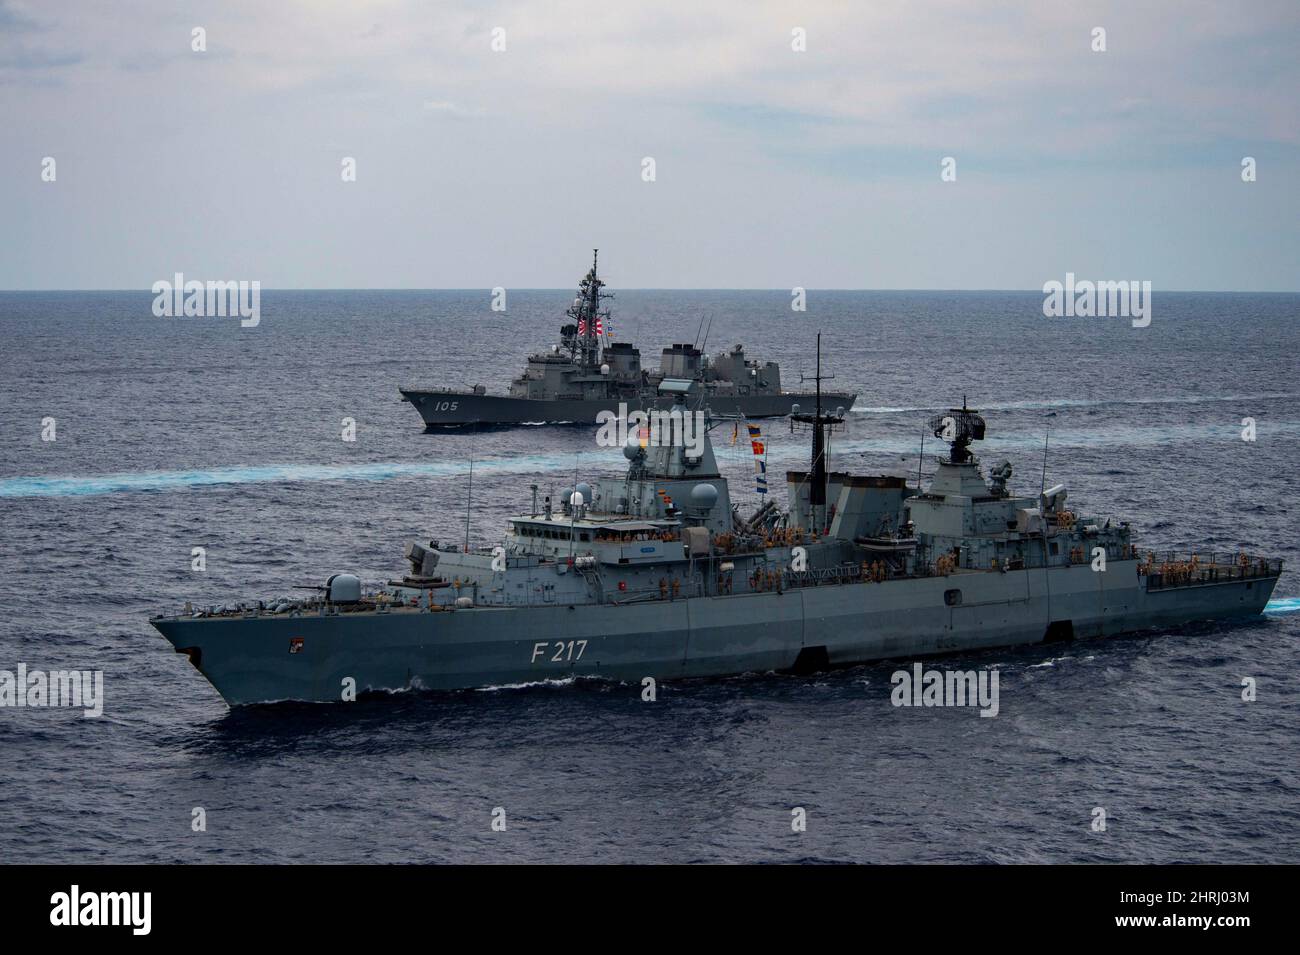 The German Navy Brandenburg-class frigate FGS Bayern, Japan Maritime Self-Defense Force Murasame-class destroyer JS Inazuma, sail in formation during exercise ANNUALEX 21 November 21, 2021 in the Philippine Sea. Stock Photo